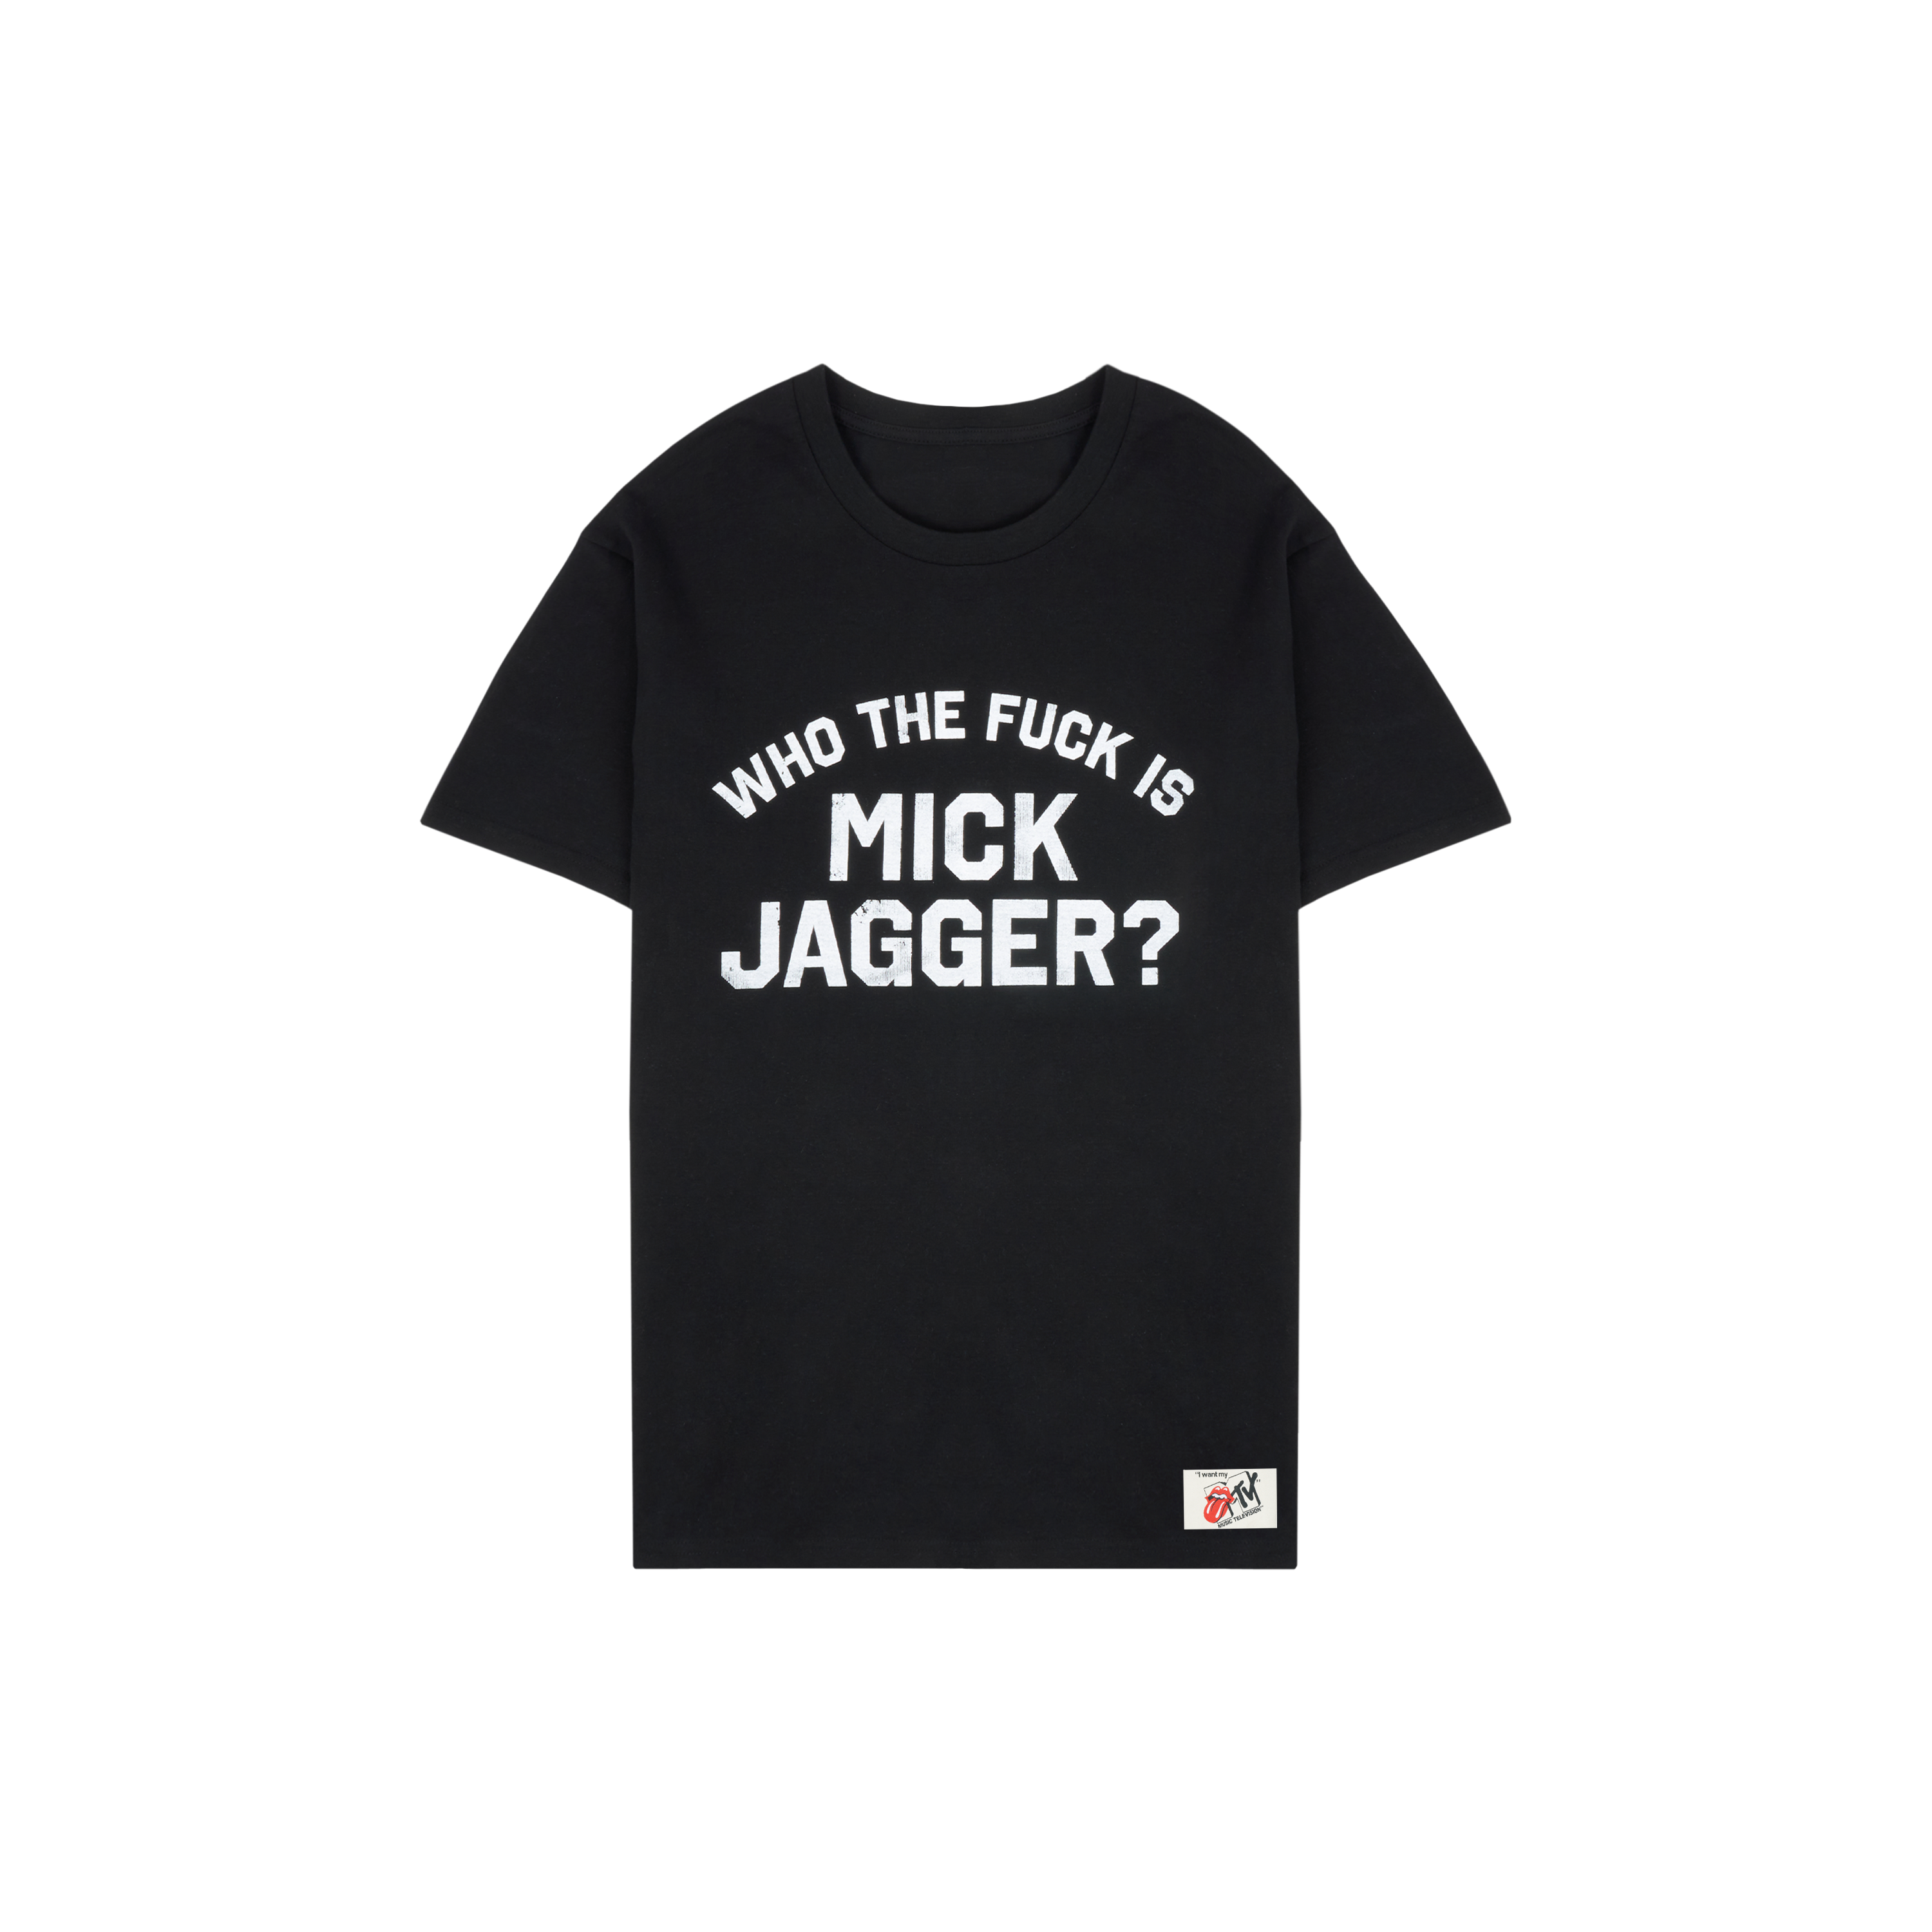 Rolling Stones x MTV Who The F Is Mick Jagger? T-Shirt